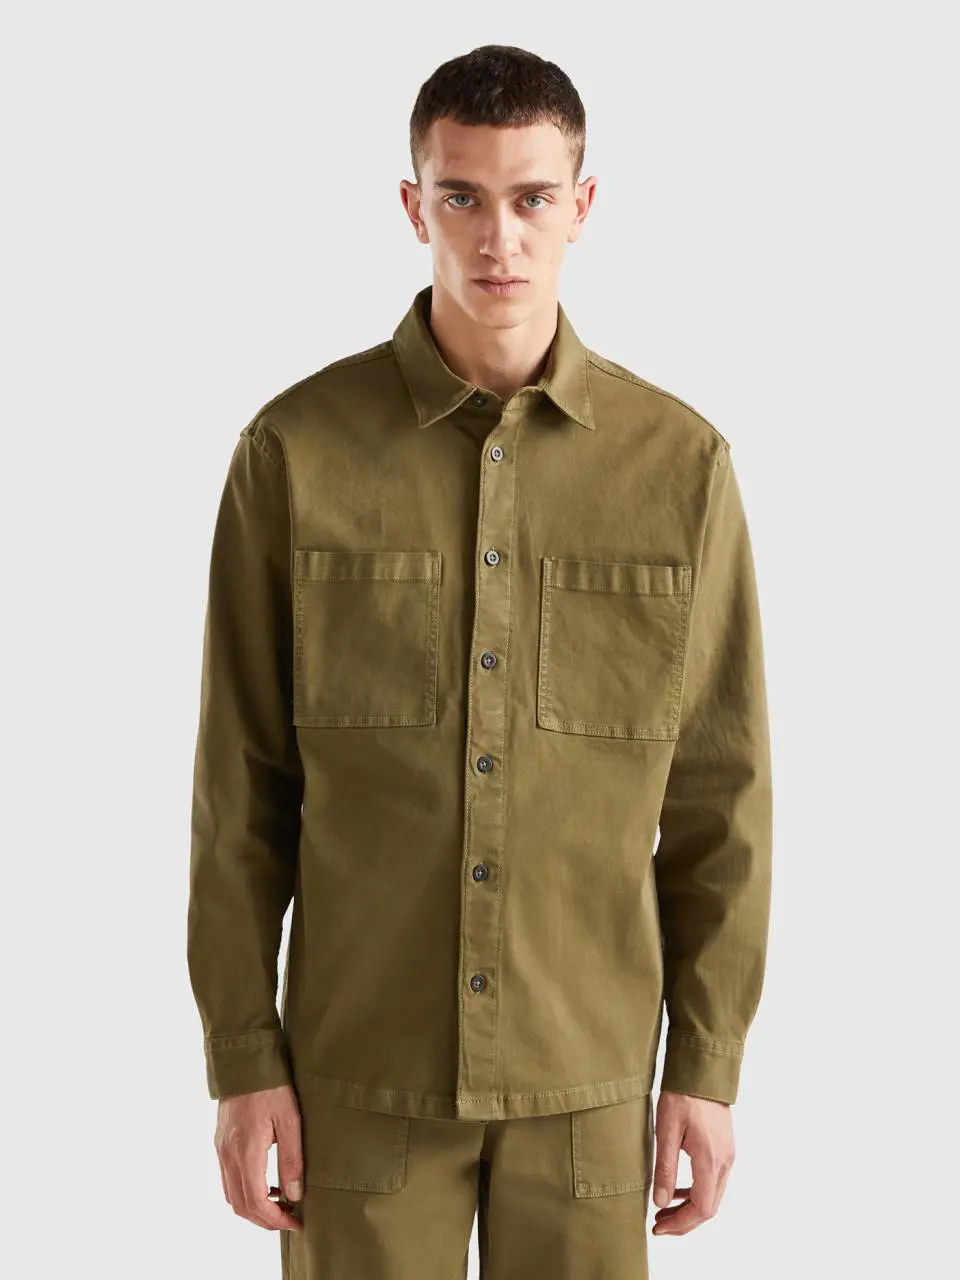 Benetton overshirt with pockets. 1